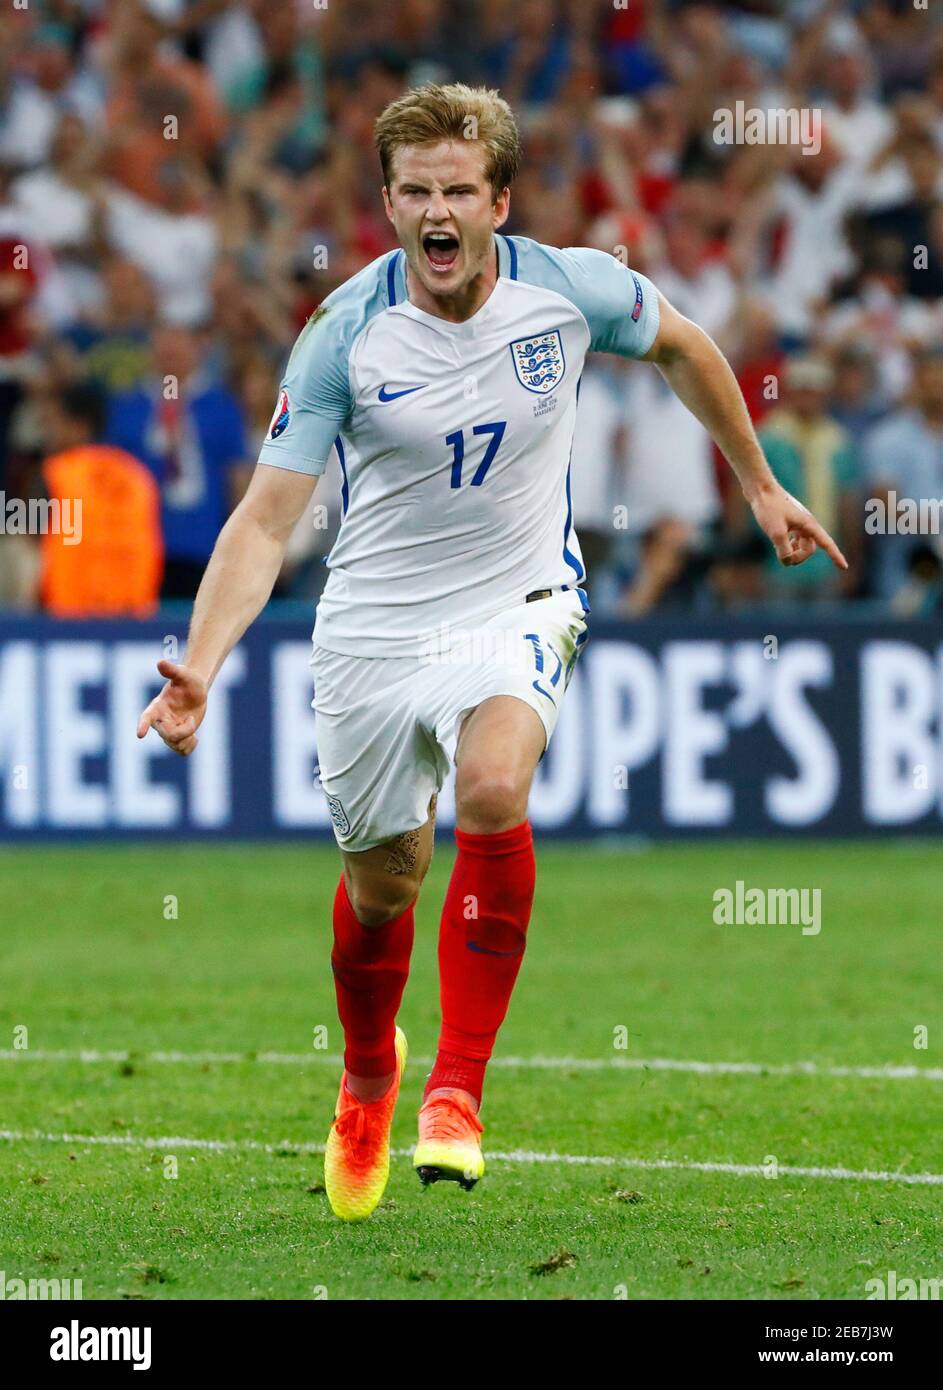 Football Soccer - England v Russia - EURO 2016 - Group B - Stade Vélodrome,  Marseille, France - 11/6/16 England's Eric Dier celebrates after scoring  their first goal REUTERS/Eddie Keogh Livepic Stock Photo - Alamy